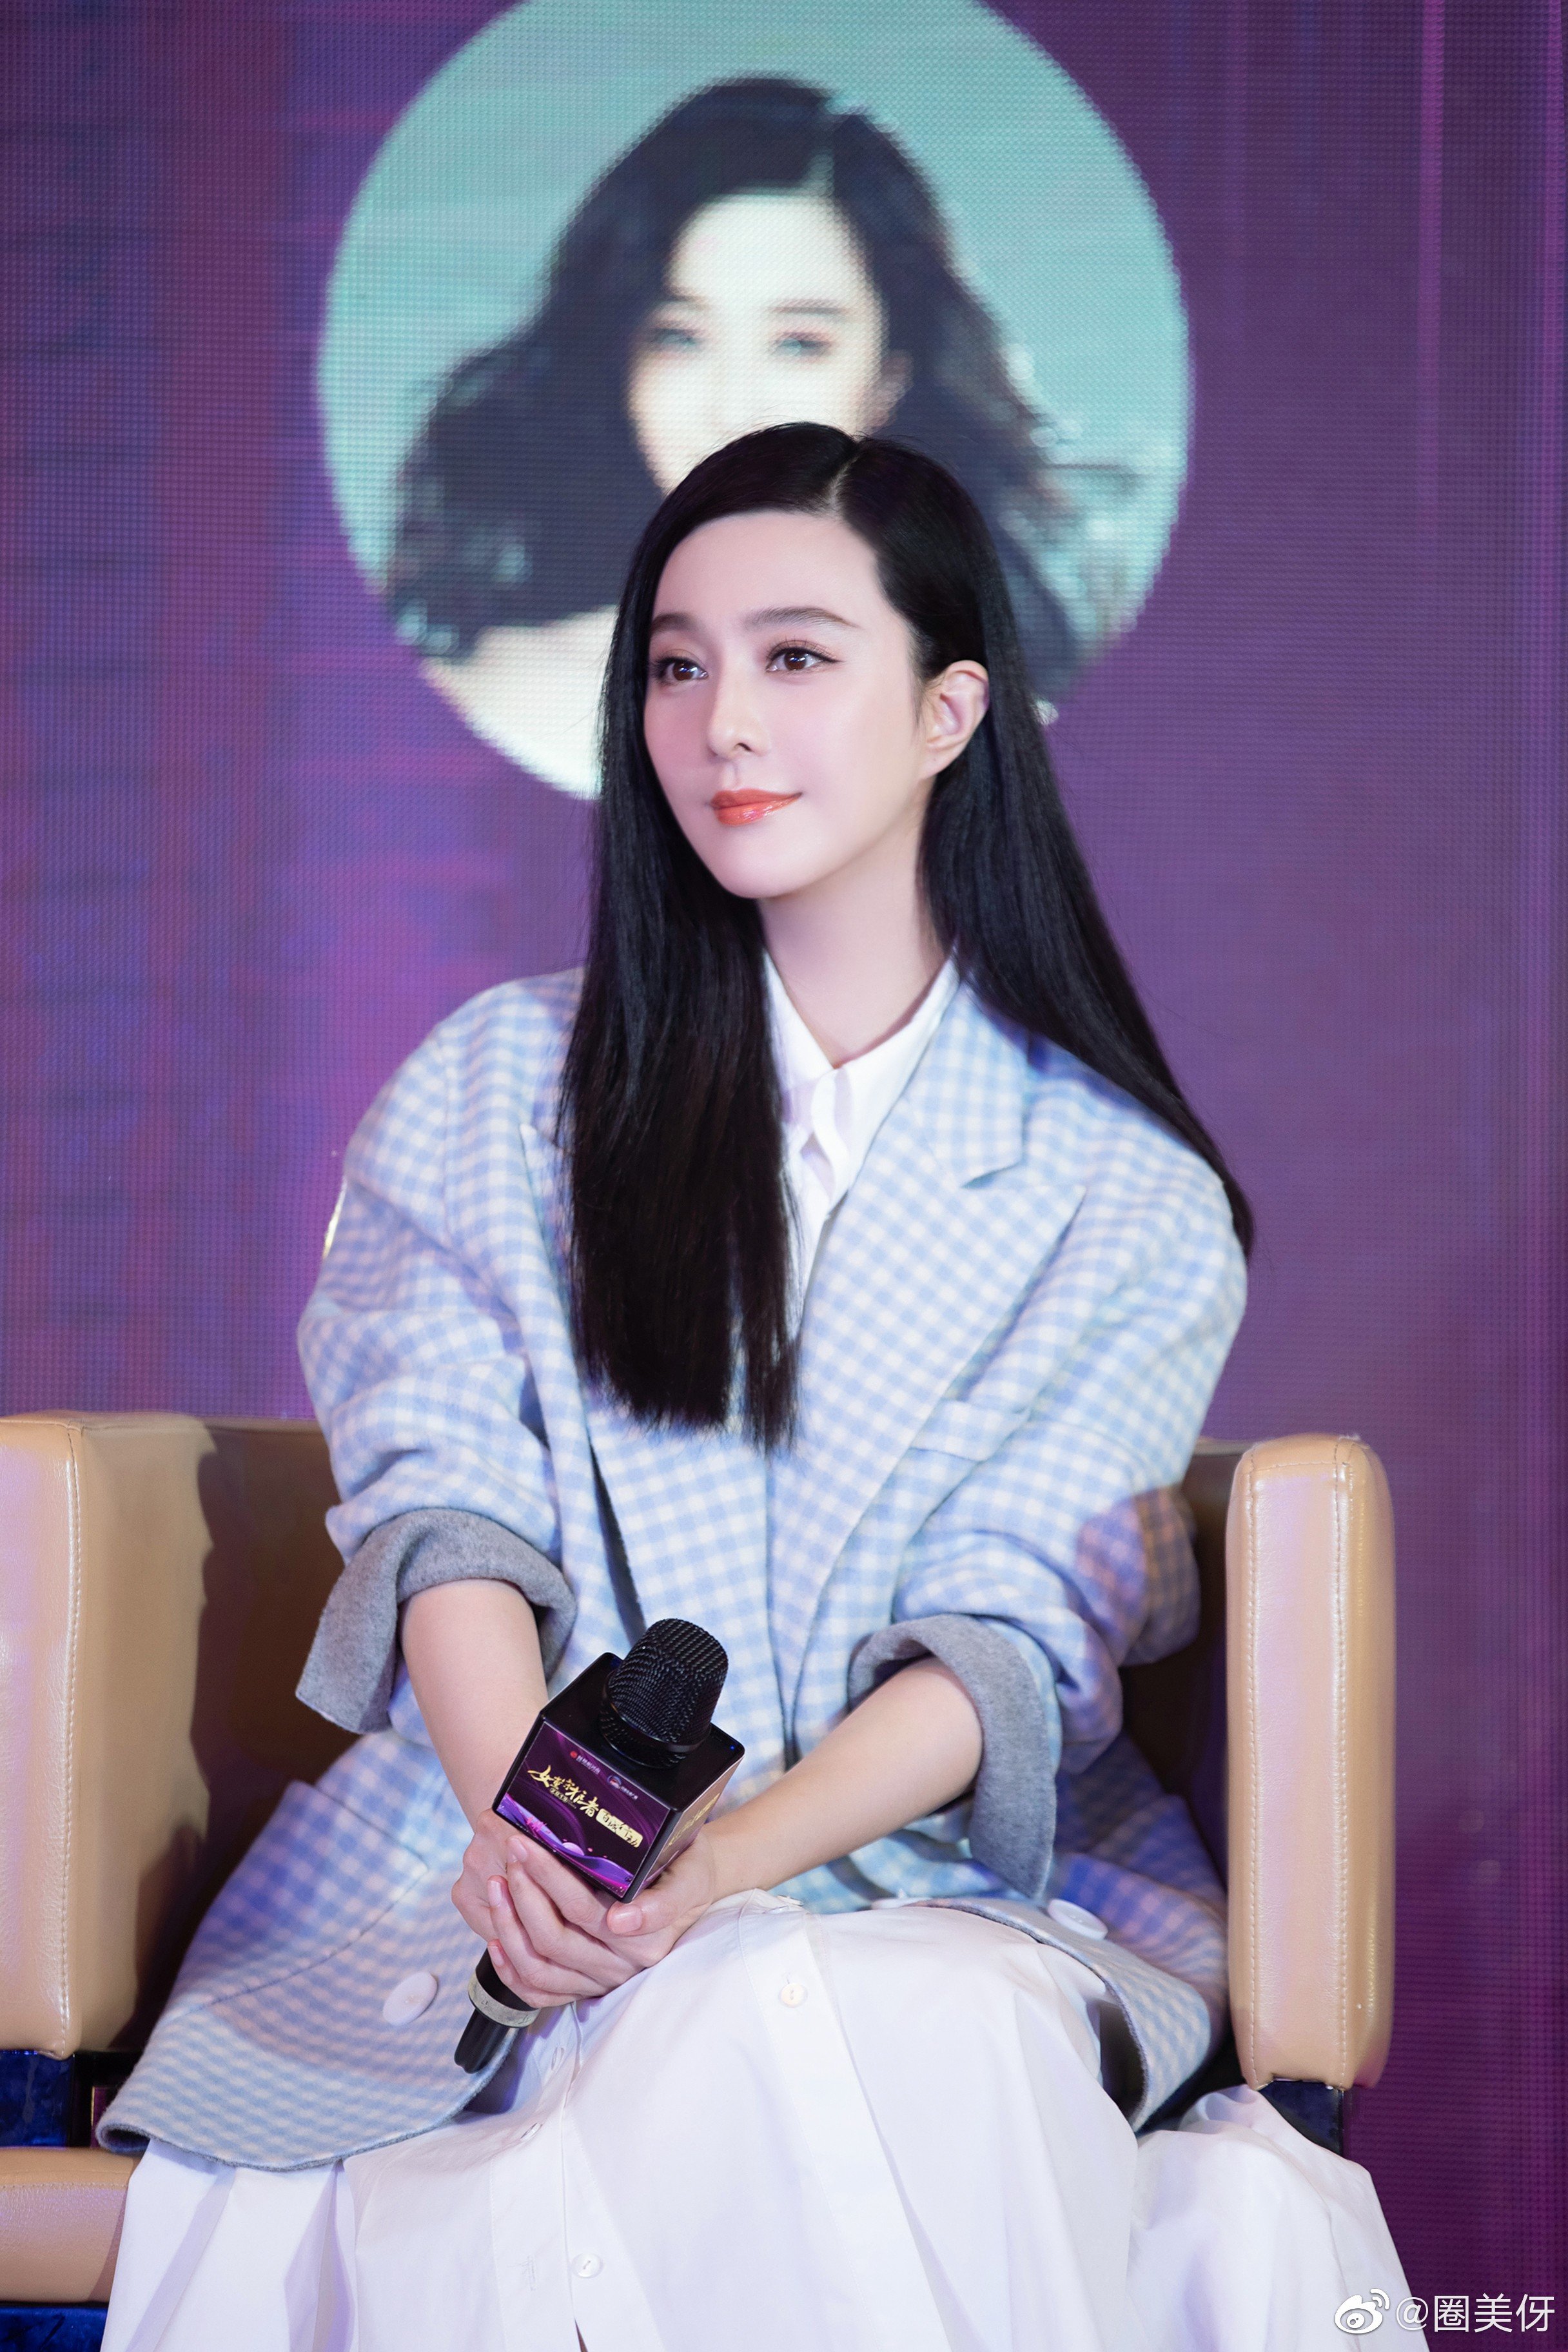 Fan Bingbing has been largely out of the public view in the last year. Photo: Weibo